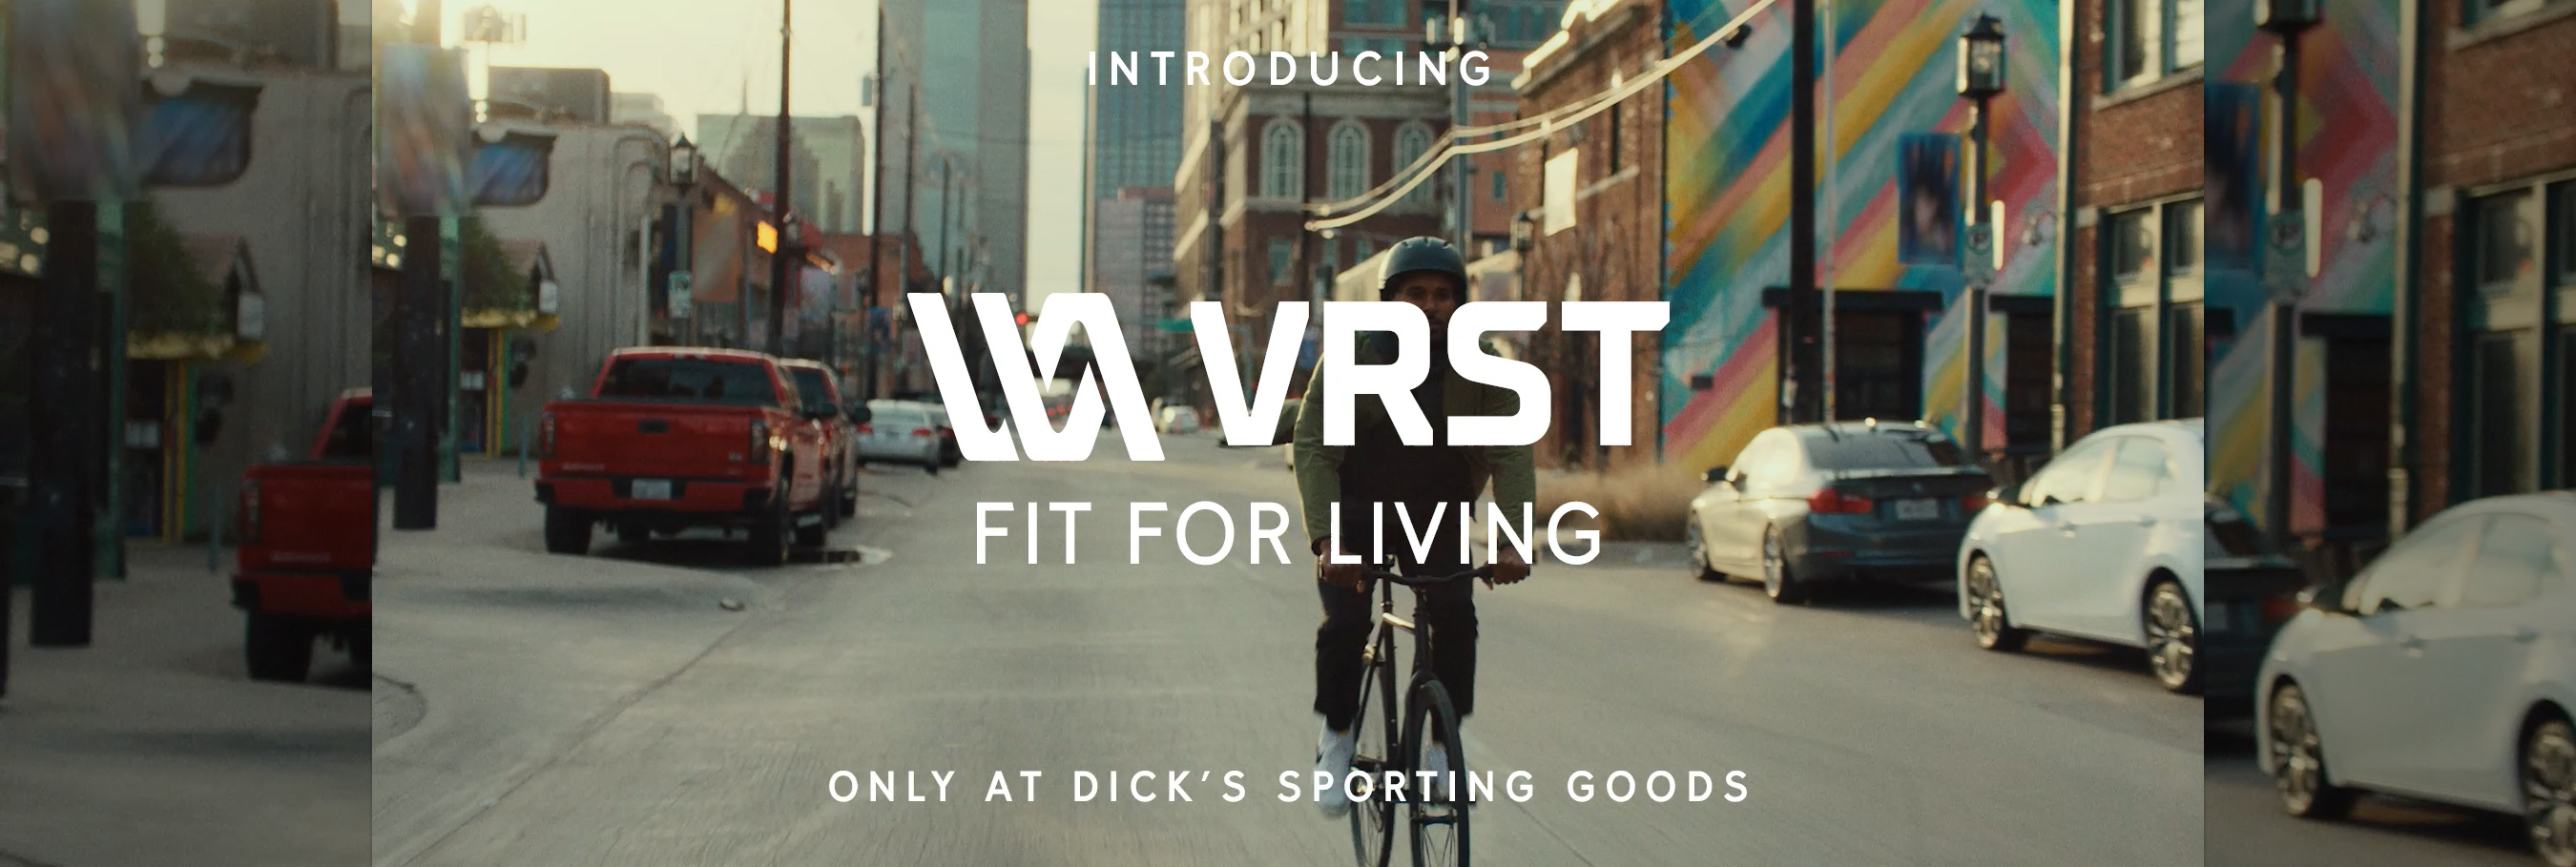 DICK'S Sporting Goods Launches "VRST" - An Exclusive, New Men's Apparel Brand Positioned To Be A First Of Its Kind For The Company